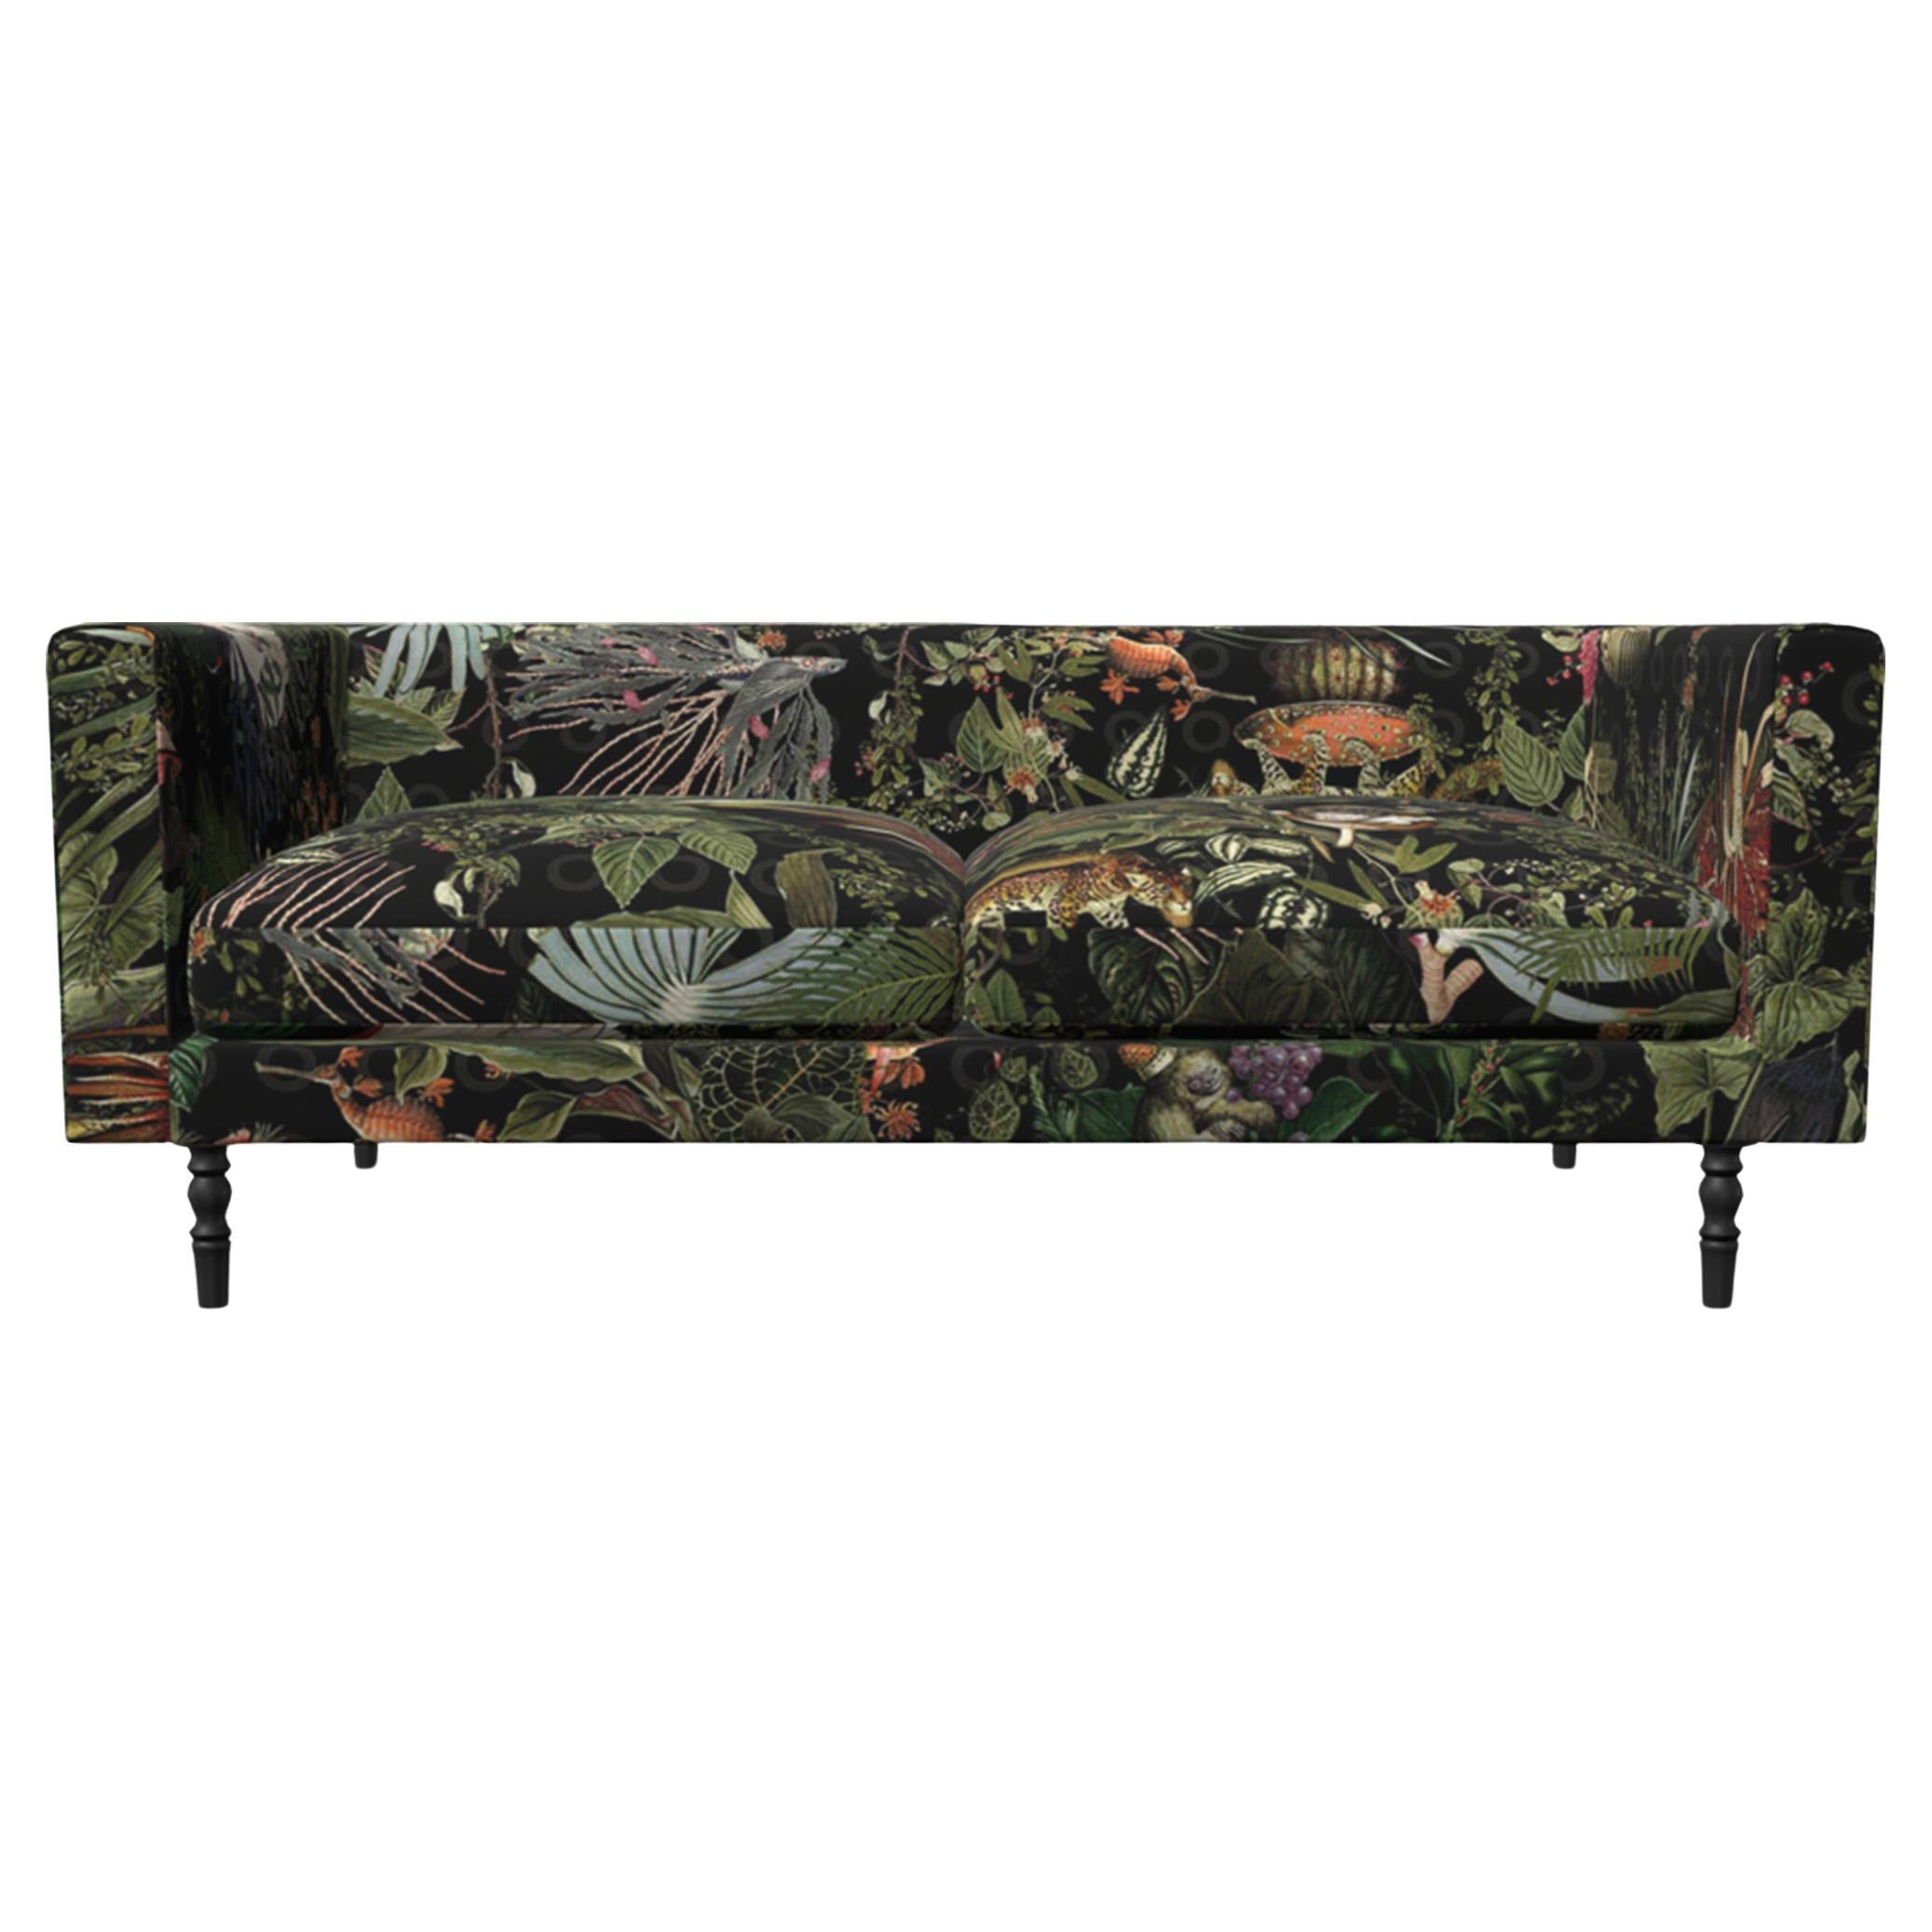 Moooi Boutique 2-Seat Sofa in The Menagerie of Extinct Animals with Pawn Legs For Sale